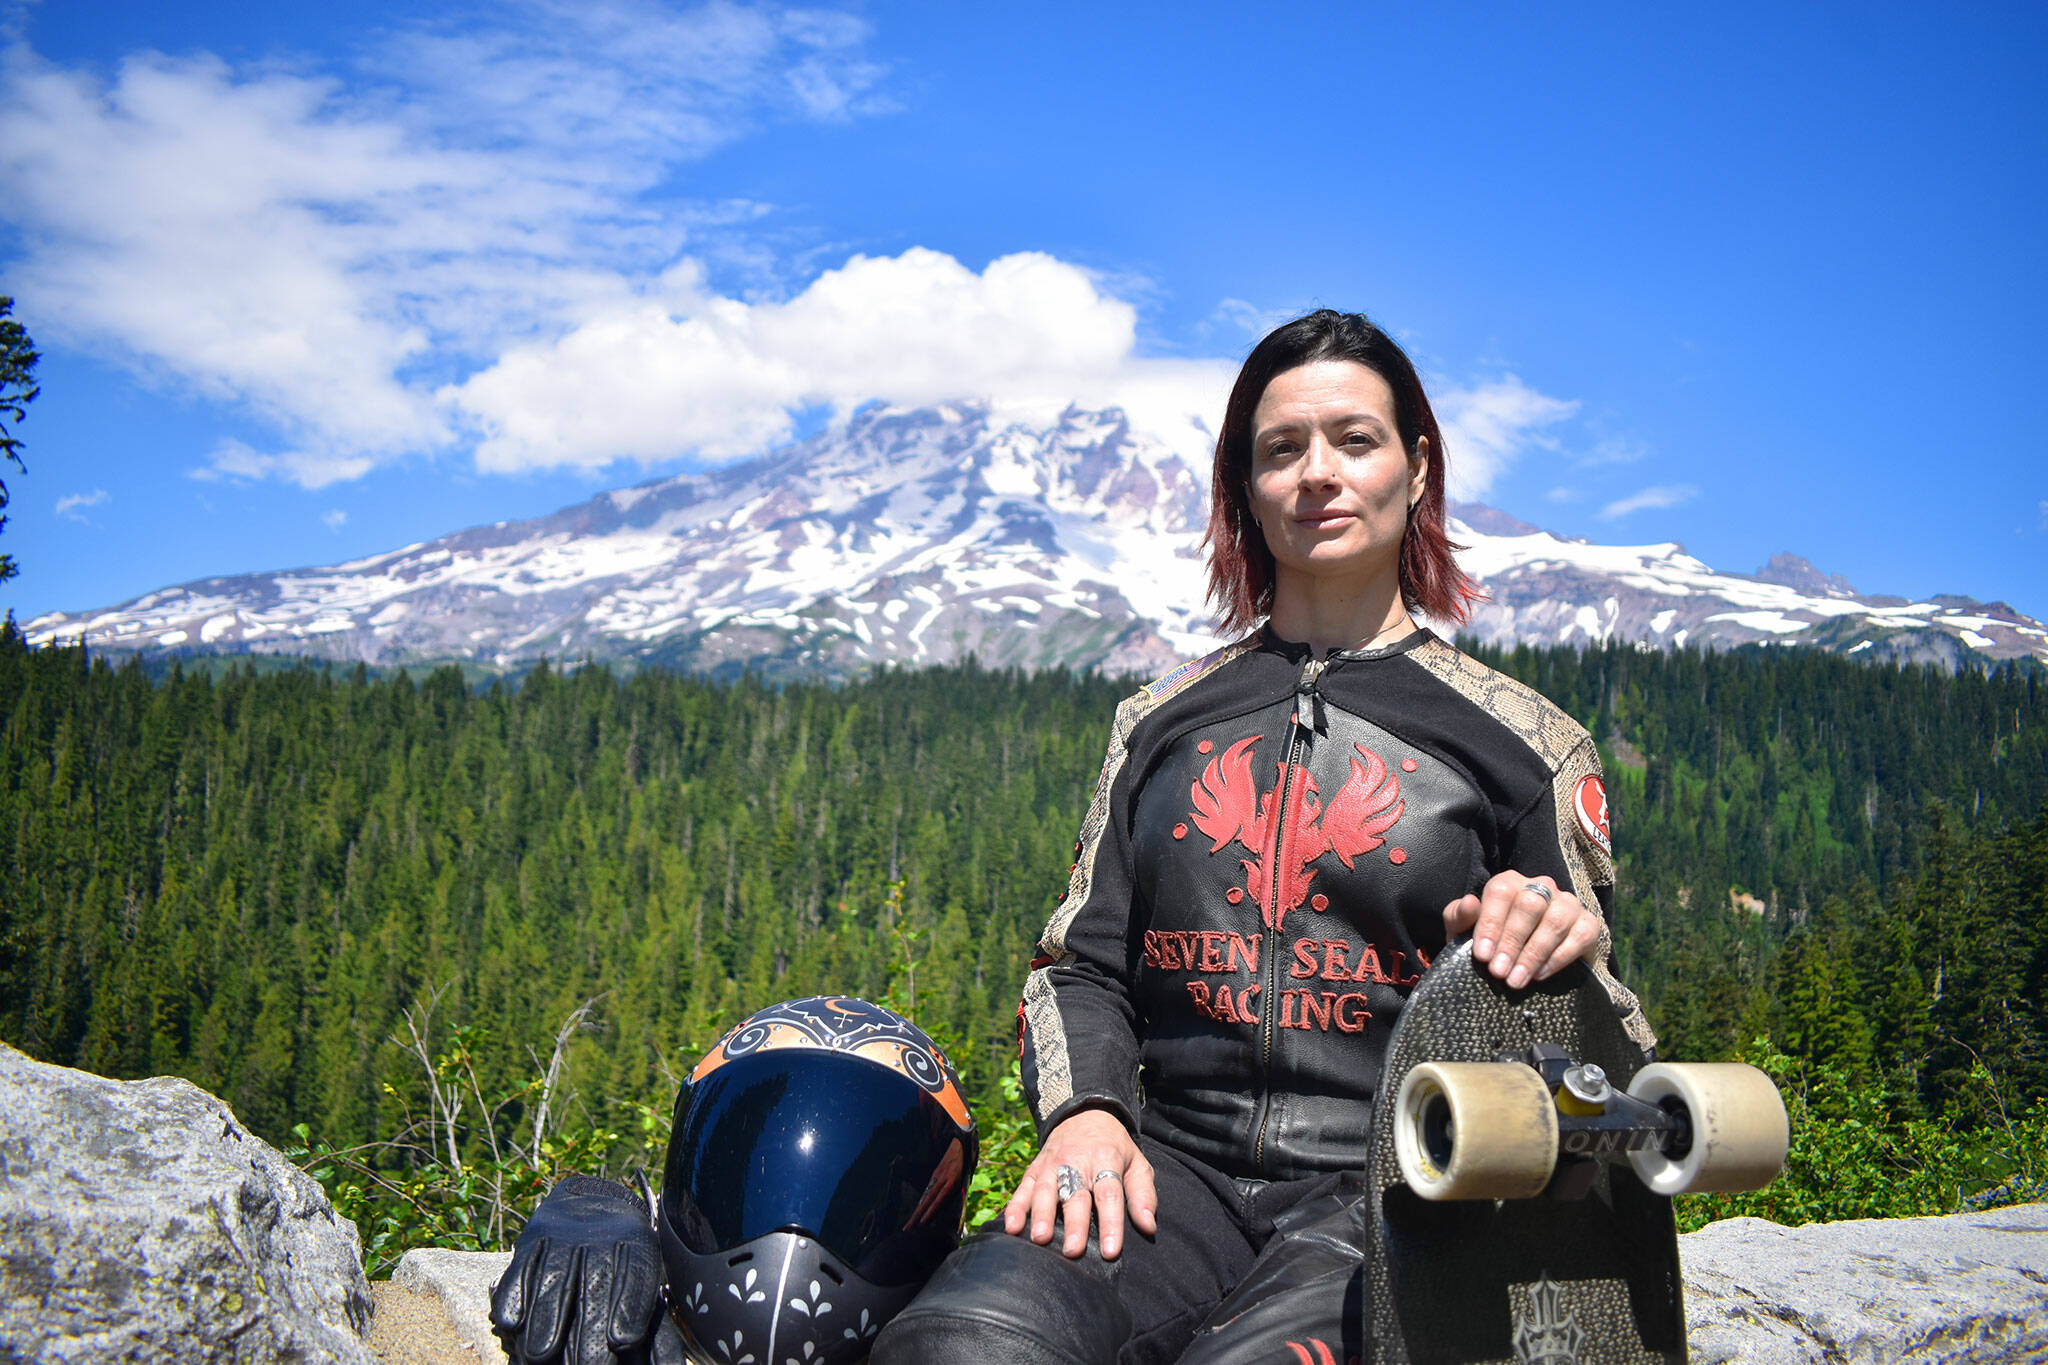 Marcie Morgan, downhill skateboarder, poses for a picture at the Mount Rainier National Park on Friday, Aug. 12.